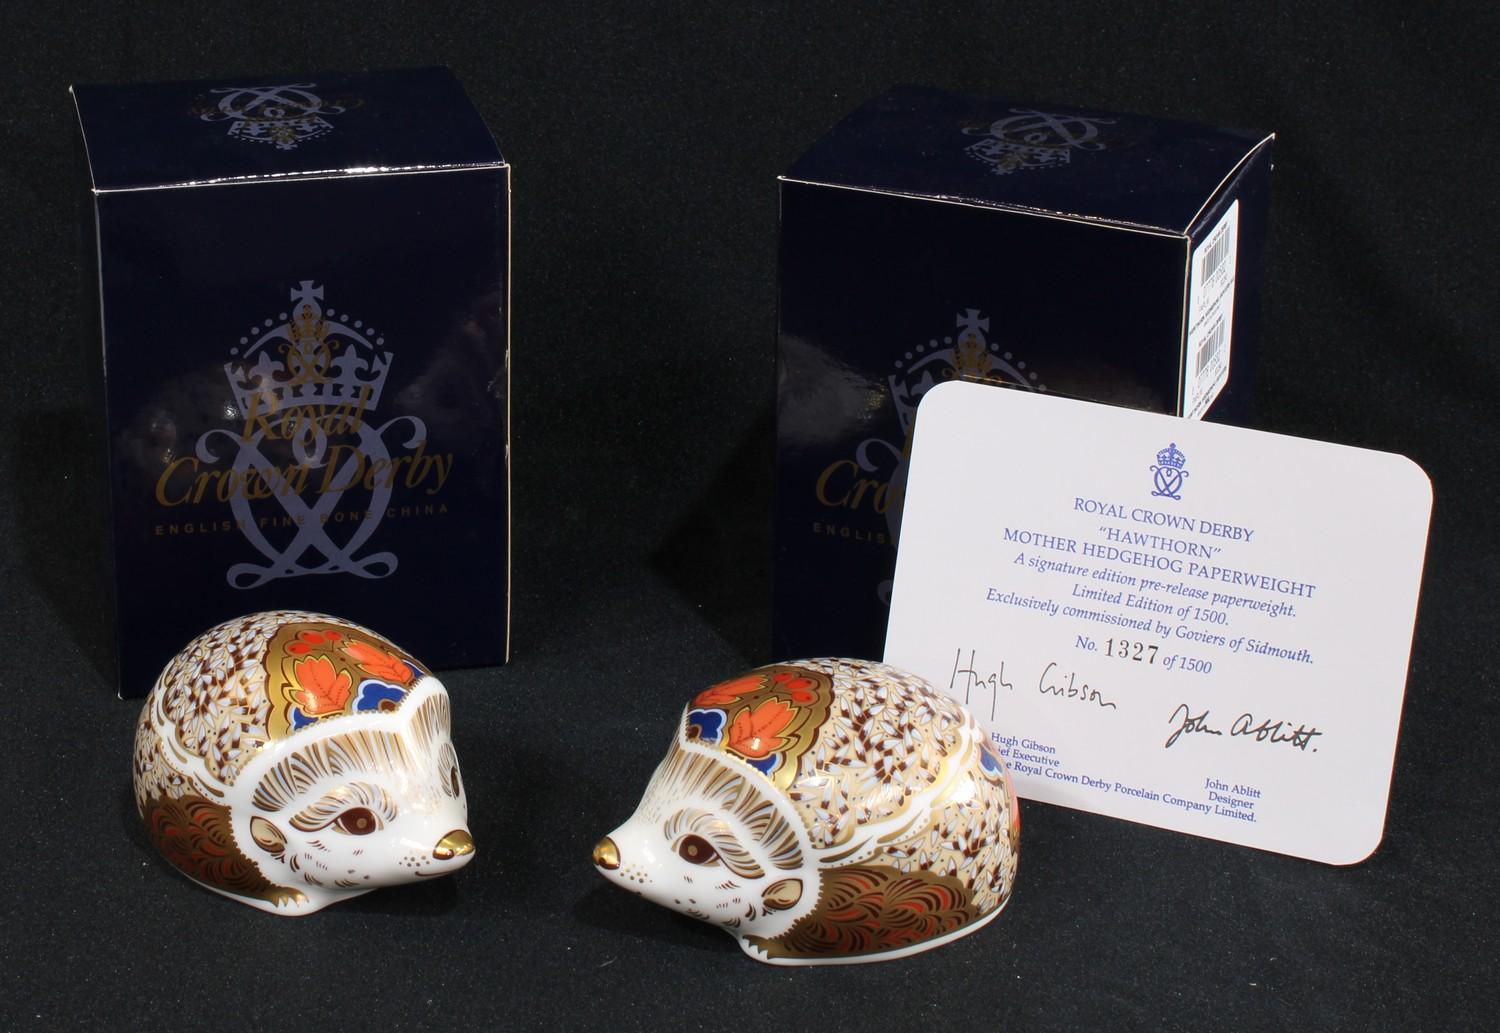 A Royal Crown Derby paperweight, Hawthorn Mother Hedgehog, limited signature edition, 1,327/1,500,